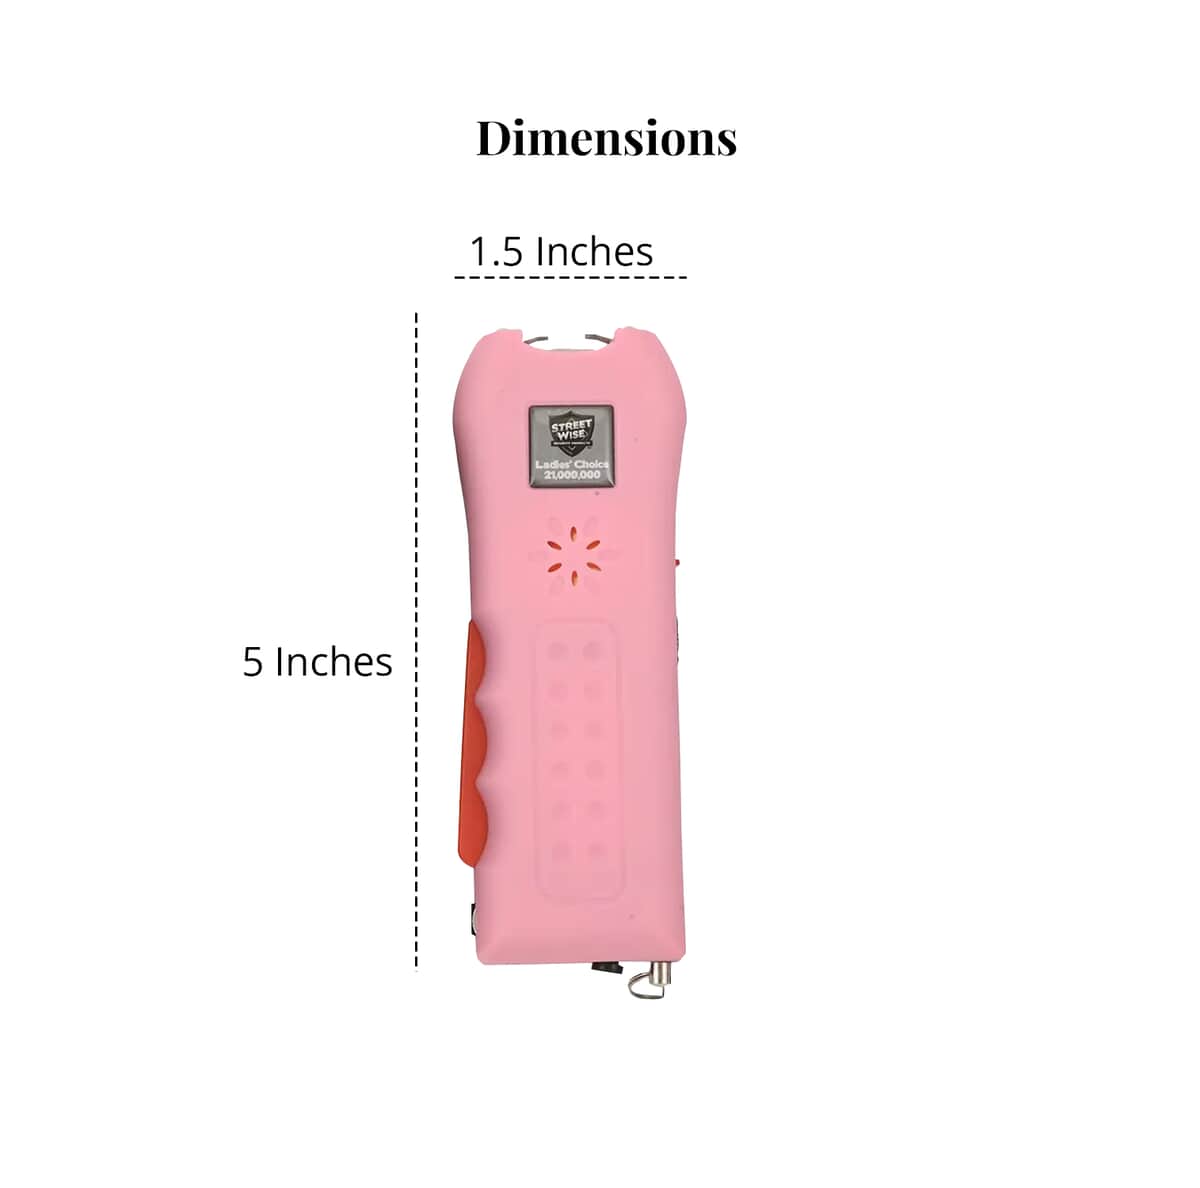 Streetwise Pink stun Gun with Flash Light, Alarm and Carry Case (5x1.5) image number 7